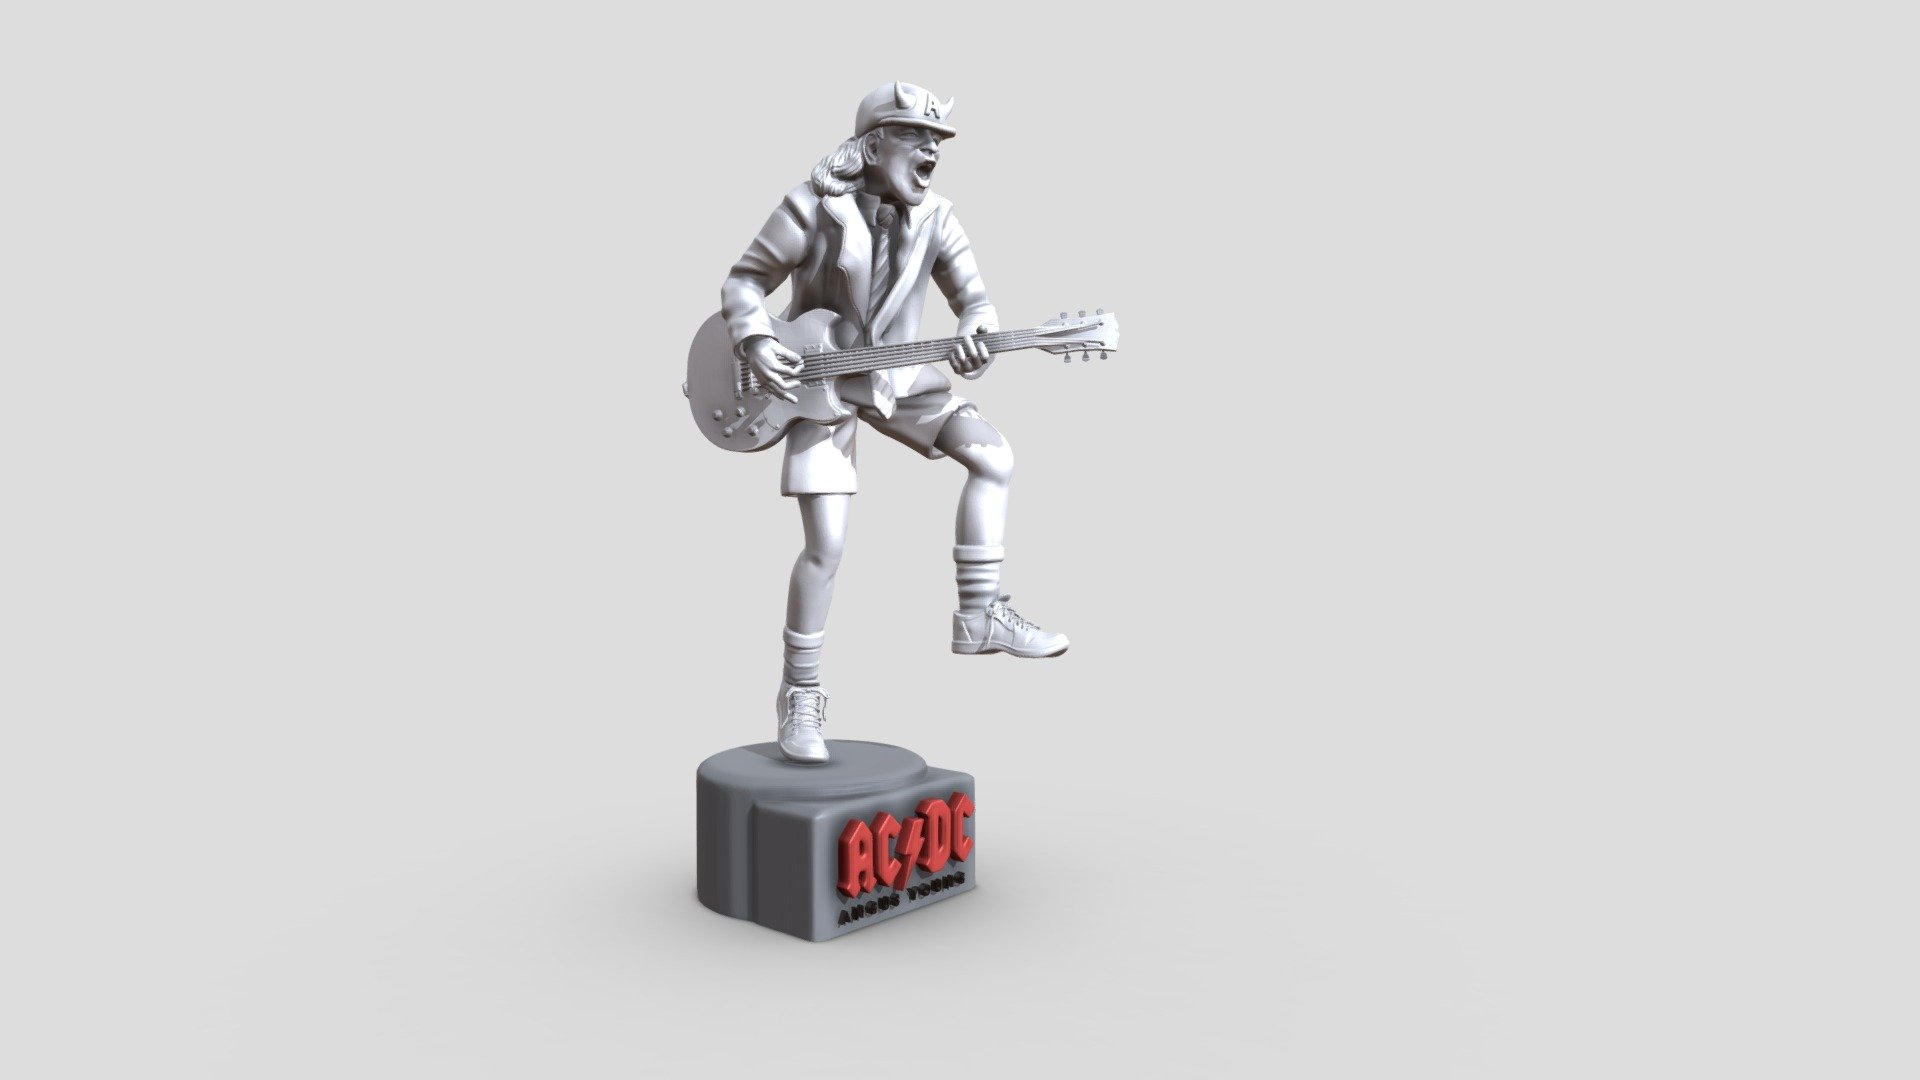 link image part all model https://cdna.artstation.com/p/assets/images/images/032/770/812/large/ronnie-yonk-1.jpg?1607428030 


Angus McKinnon Young (born 31 March 1955) is an Australian musician, best known as the co-founder, lead guitarist, and songwriter of the Australian hard rock band AC/DC. He is known for his energetic performances, schoolboy-uniform stage outfits and his own version of Chuck Berry's duckwalk. Young was ranked 24th in Rolling Stone magazine's 




you are free to scale it. Zip file contains obj and stl


 - Angus Young - ACDC 3D Printable - Buy Royalty Free 3D model by ronnie_yonk 3d model